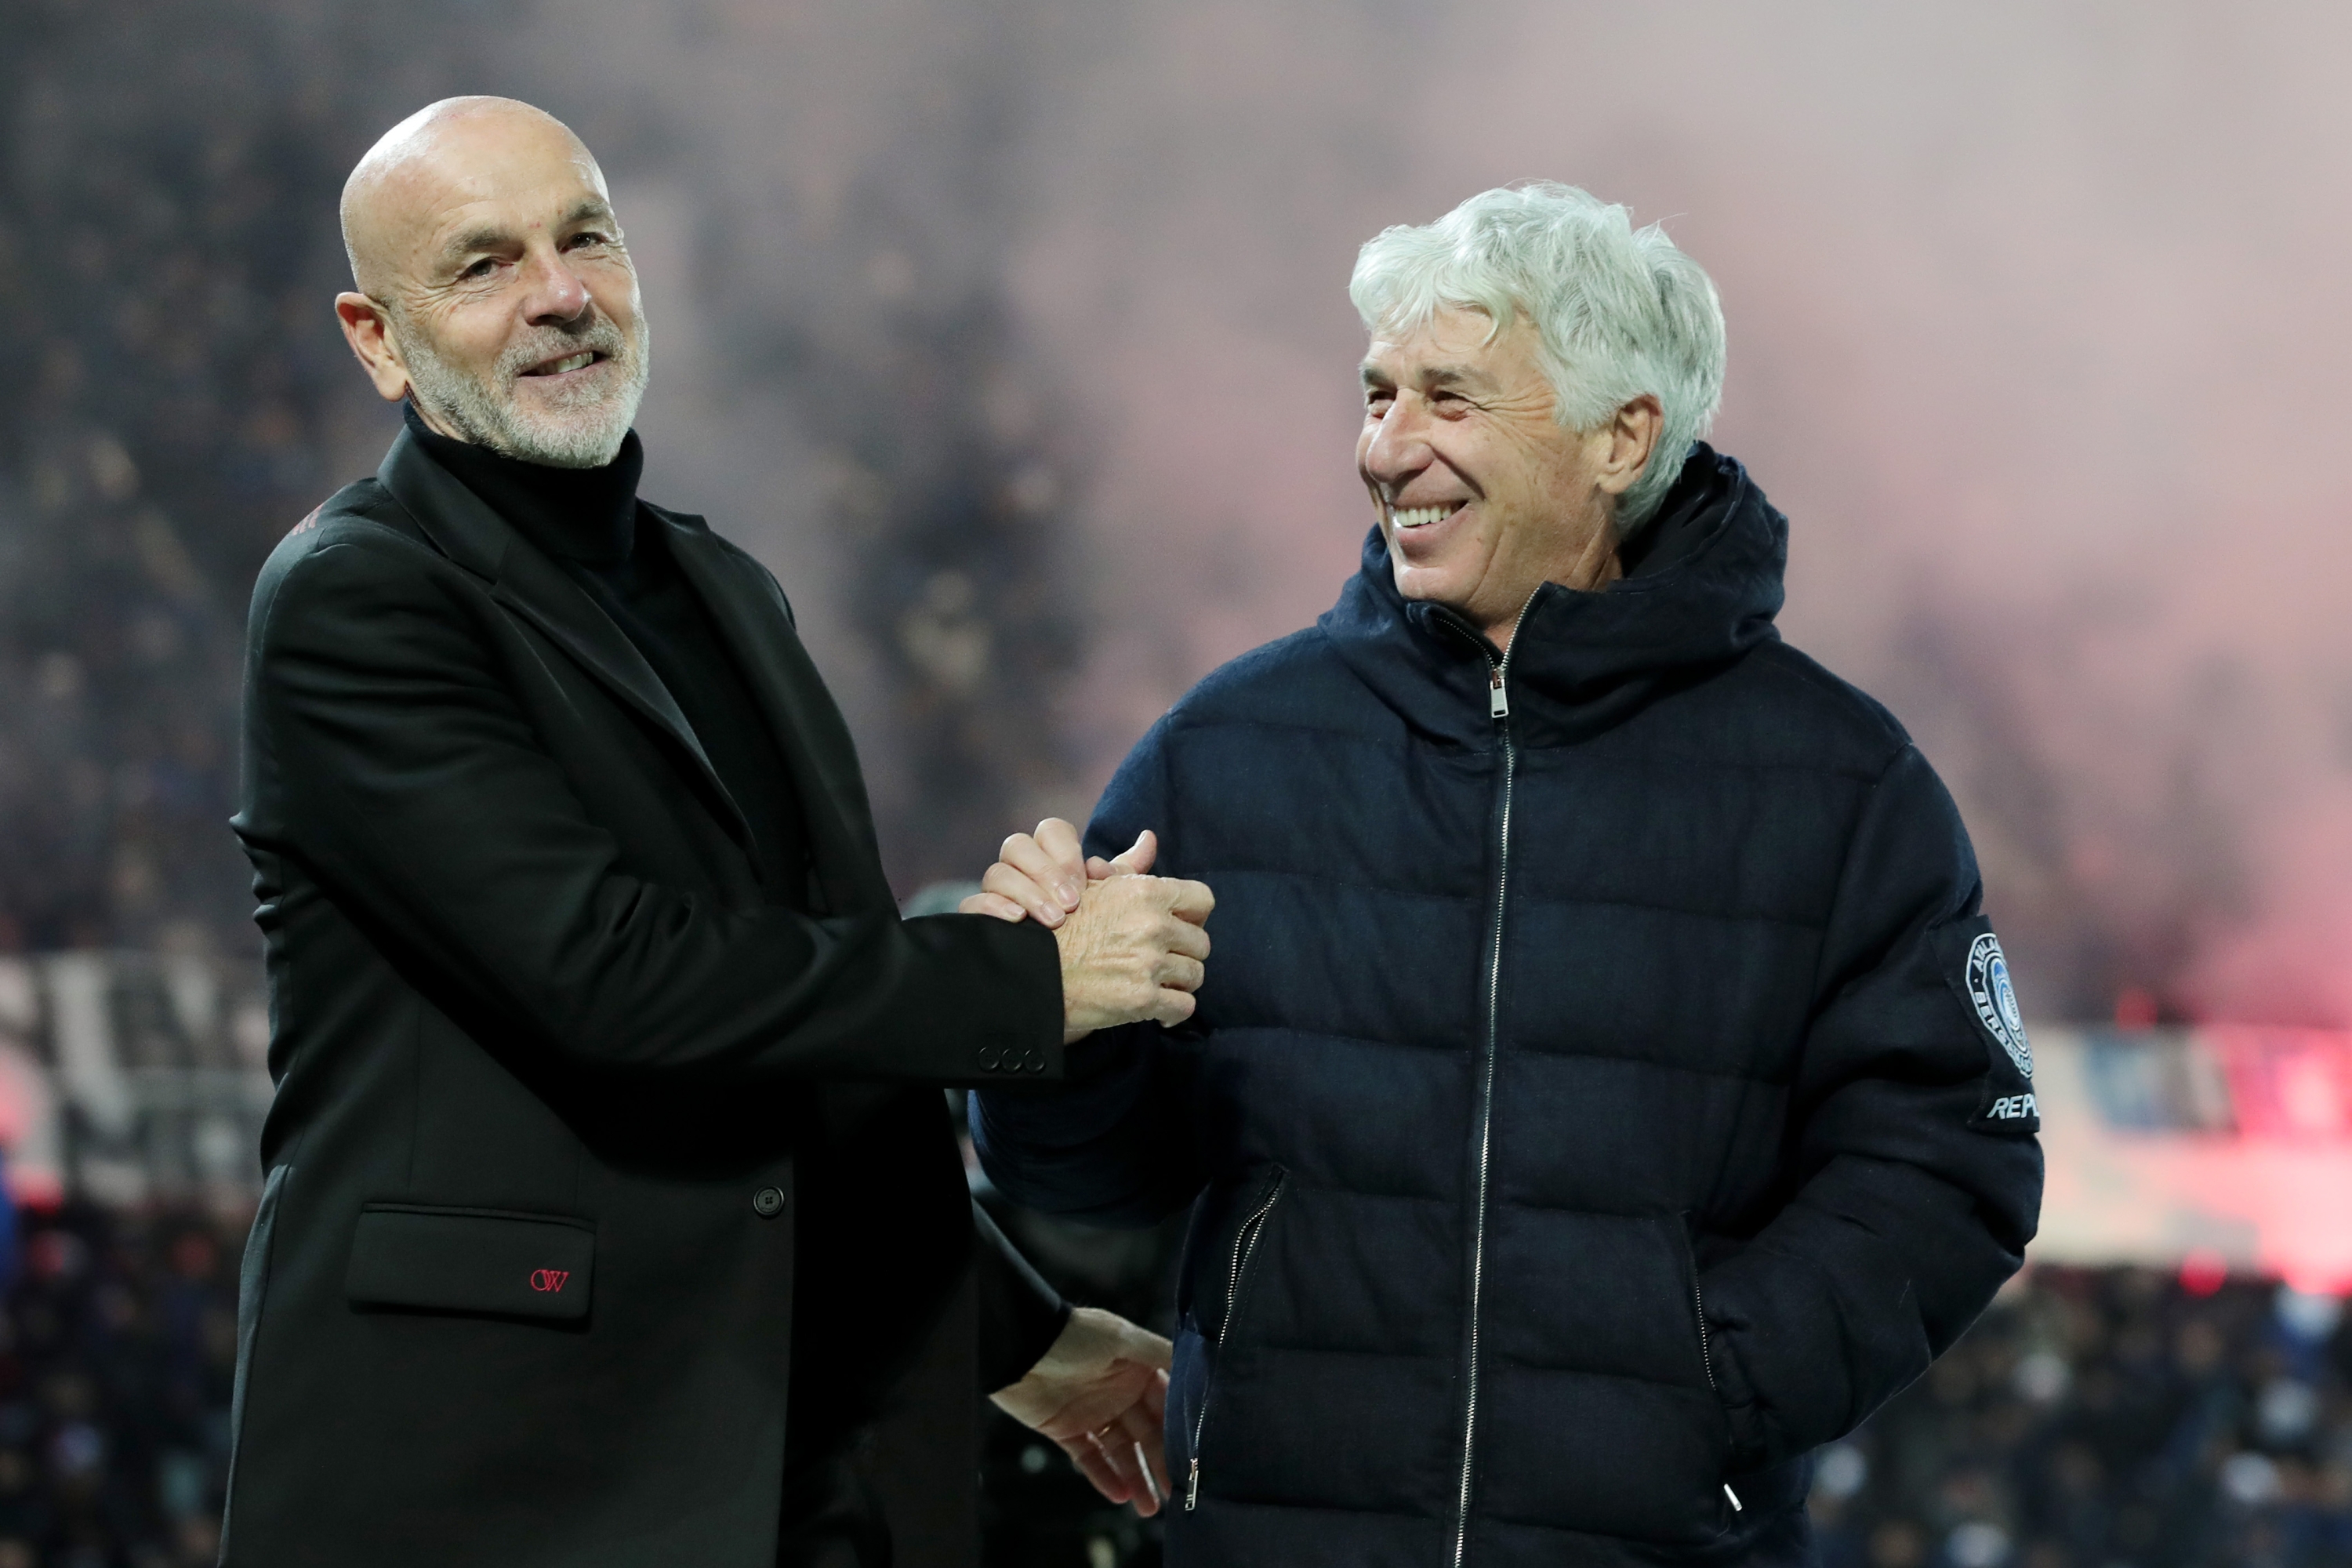 BERGAMO, ITALY - DECEMBER 09: Stefano Pioli, Head Coach of AC Milan, shakes hands with Gian Piero Gasperini, Head Coach of Atalanta BC, prior to the Serie A TIM match between Atalanta BC and AC Milan at Gewiss Stadium on December 09, 2023 in Bergamo, Italy. (Photo by Emilio Andreoli/Getty Images)